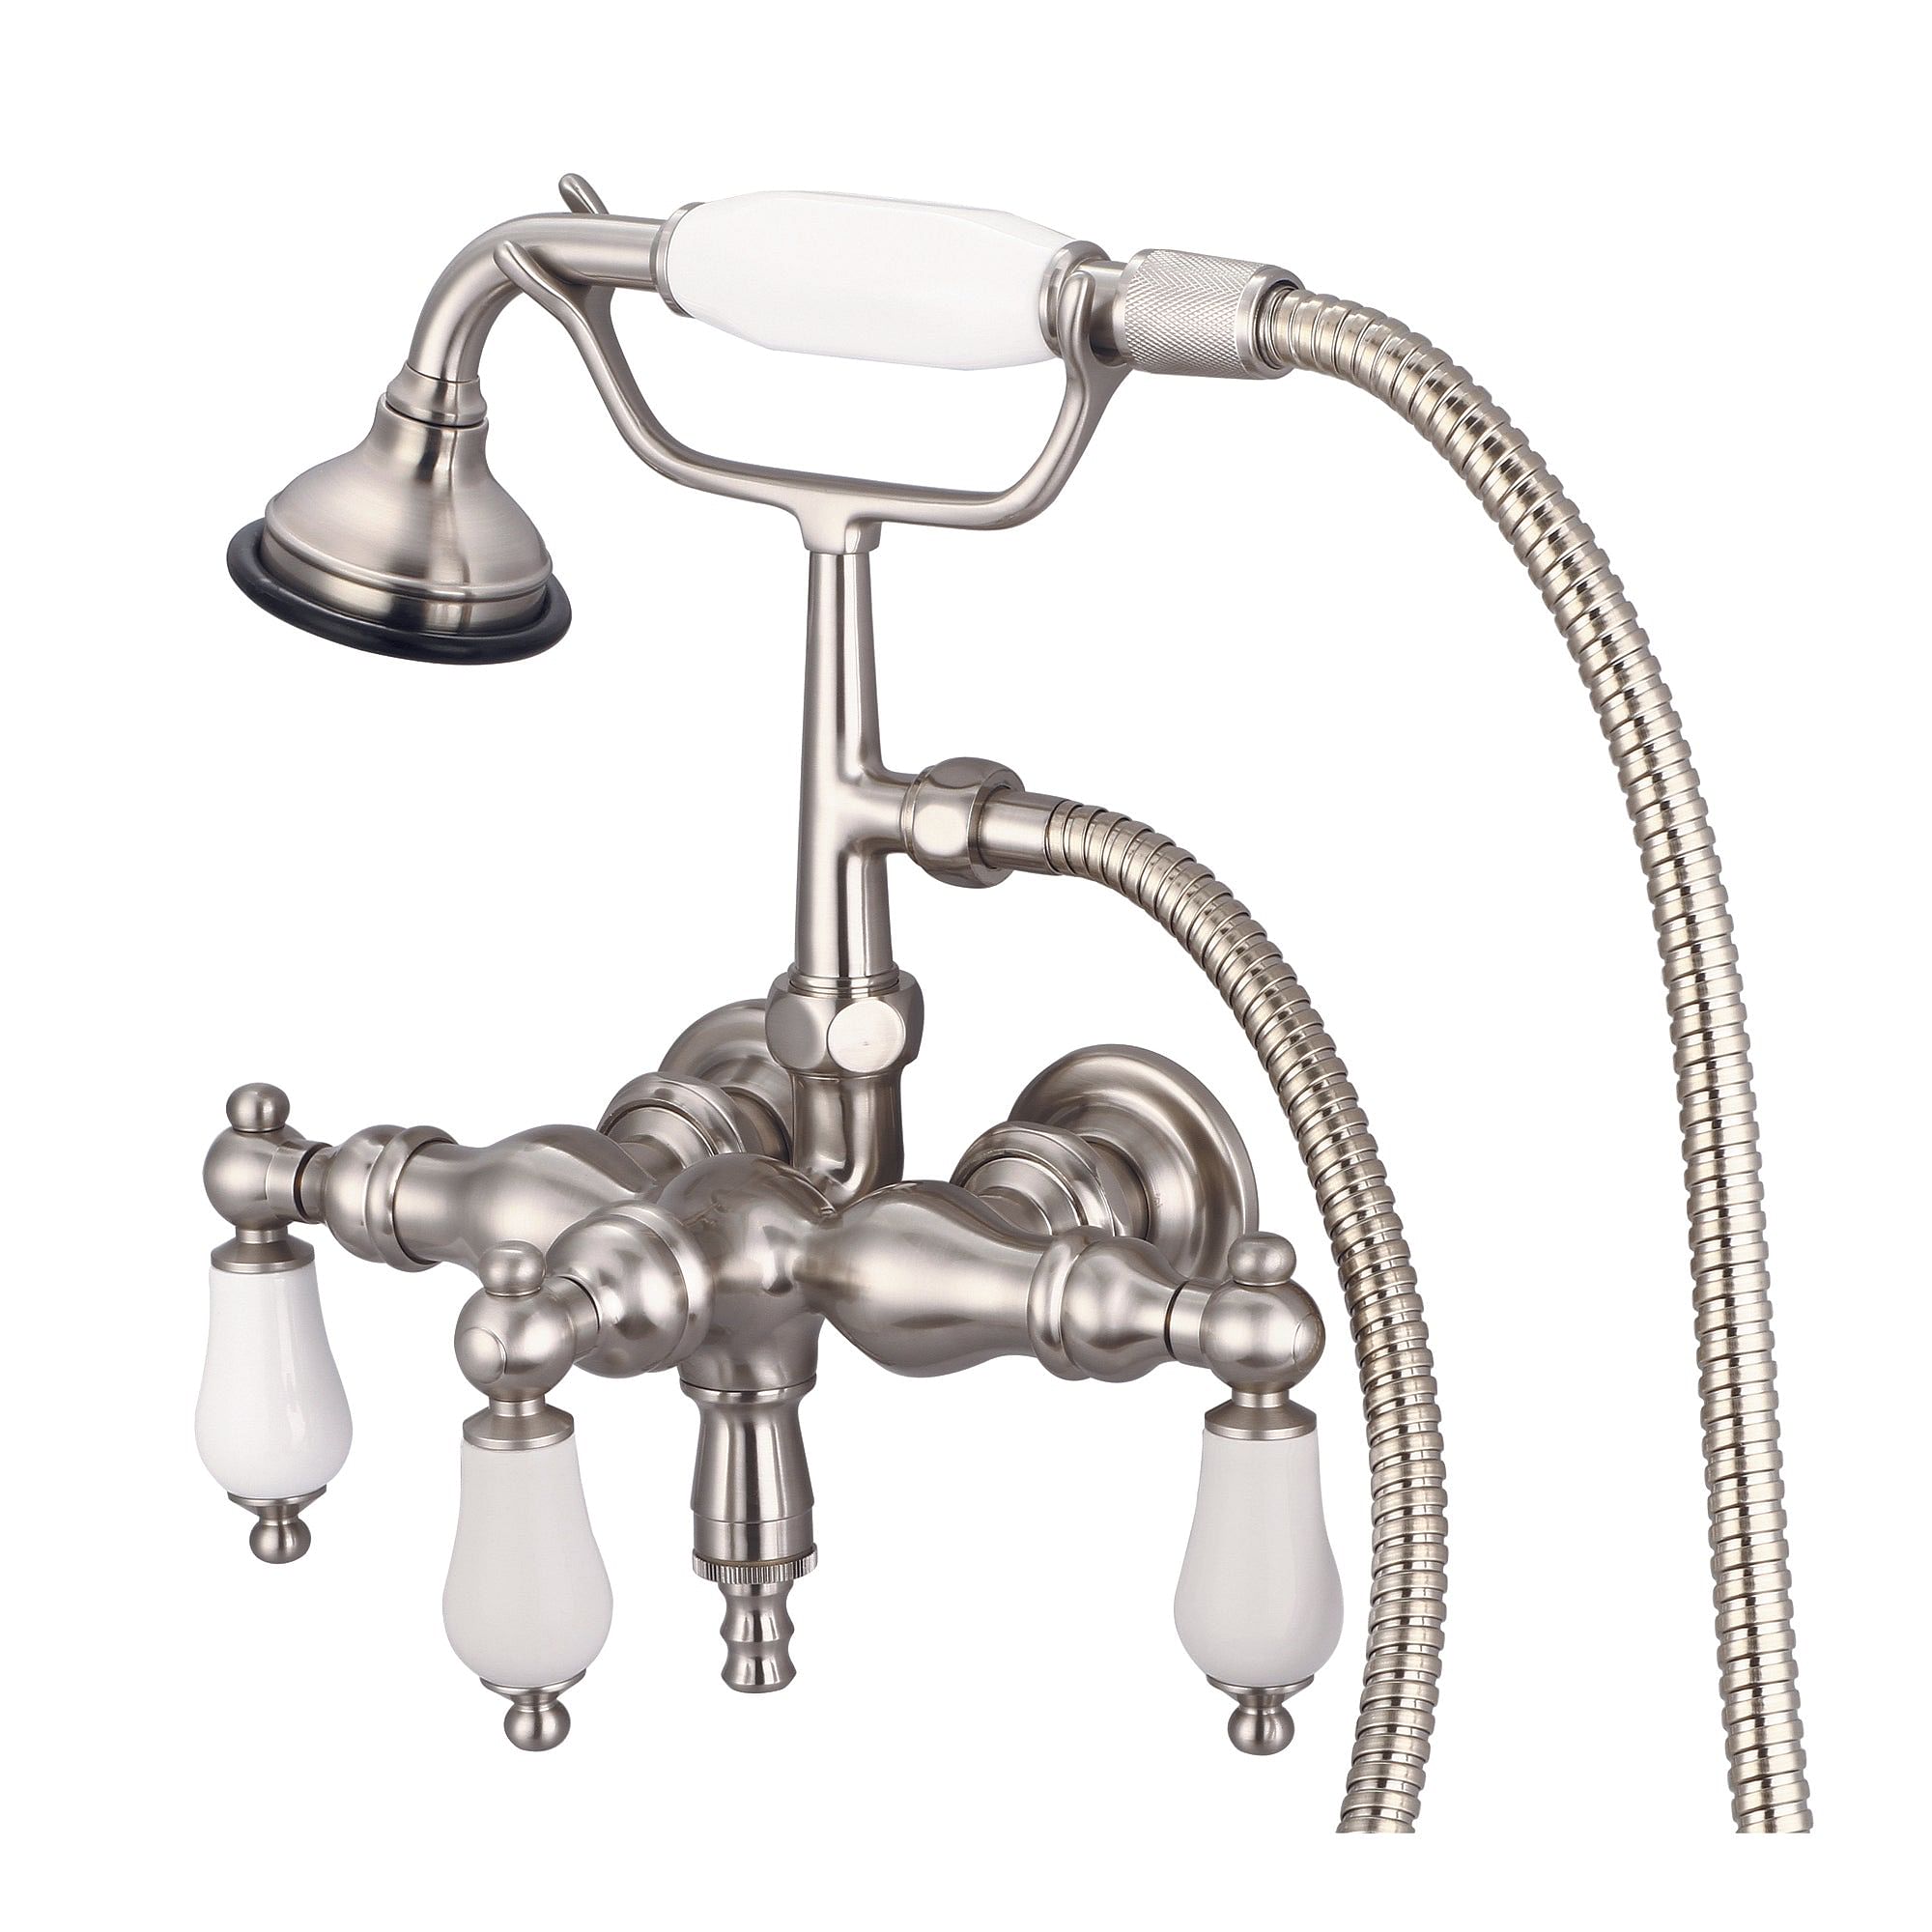 Vintage Classic 3.375 Inch Center Wall Mount Tub Faucet With Down Spout, Straight Wall Connector & Handheld Shower in Brushed Nickel Finish With Porcelain Lever Handles Without labels